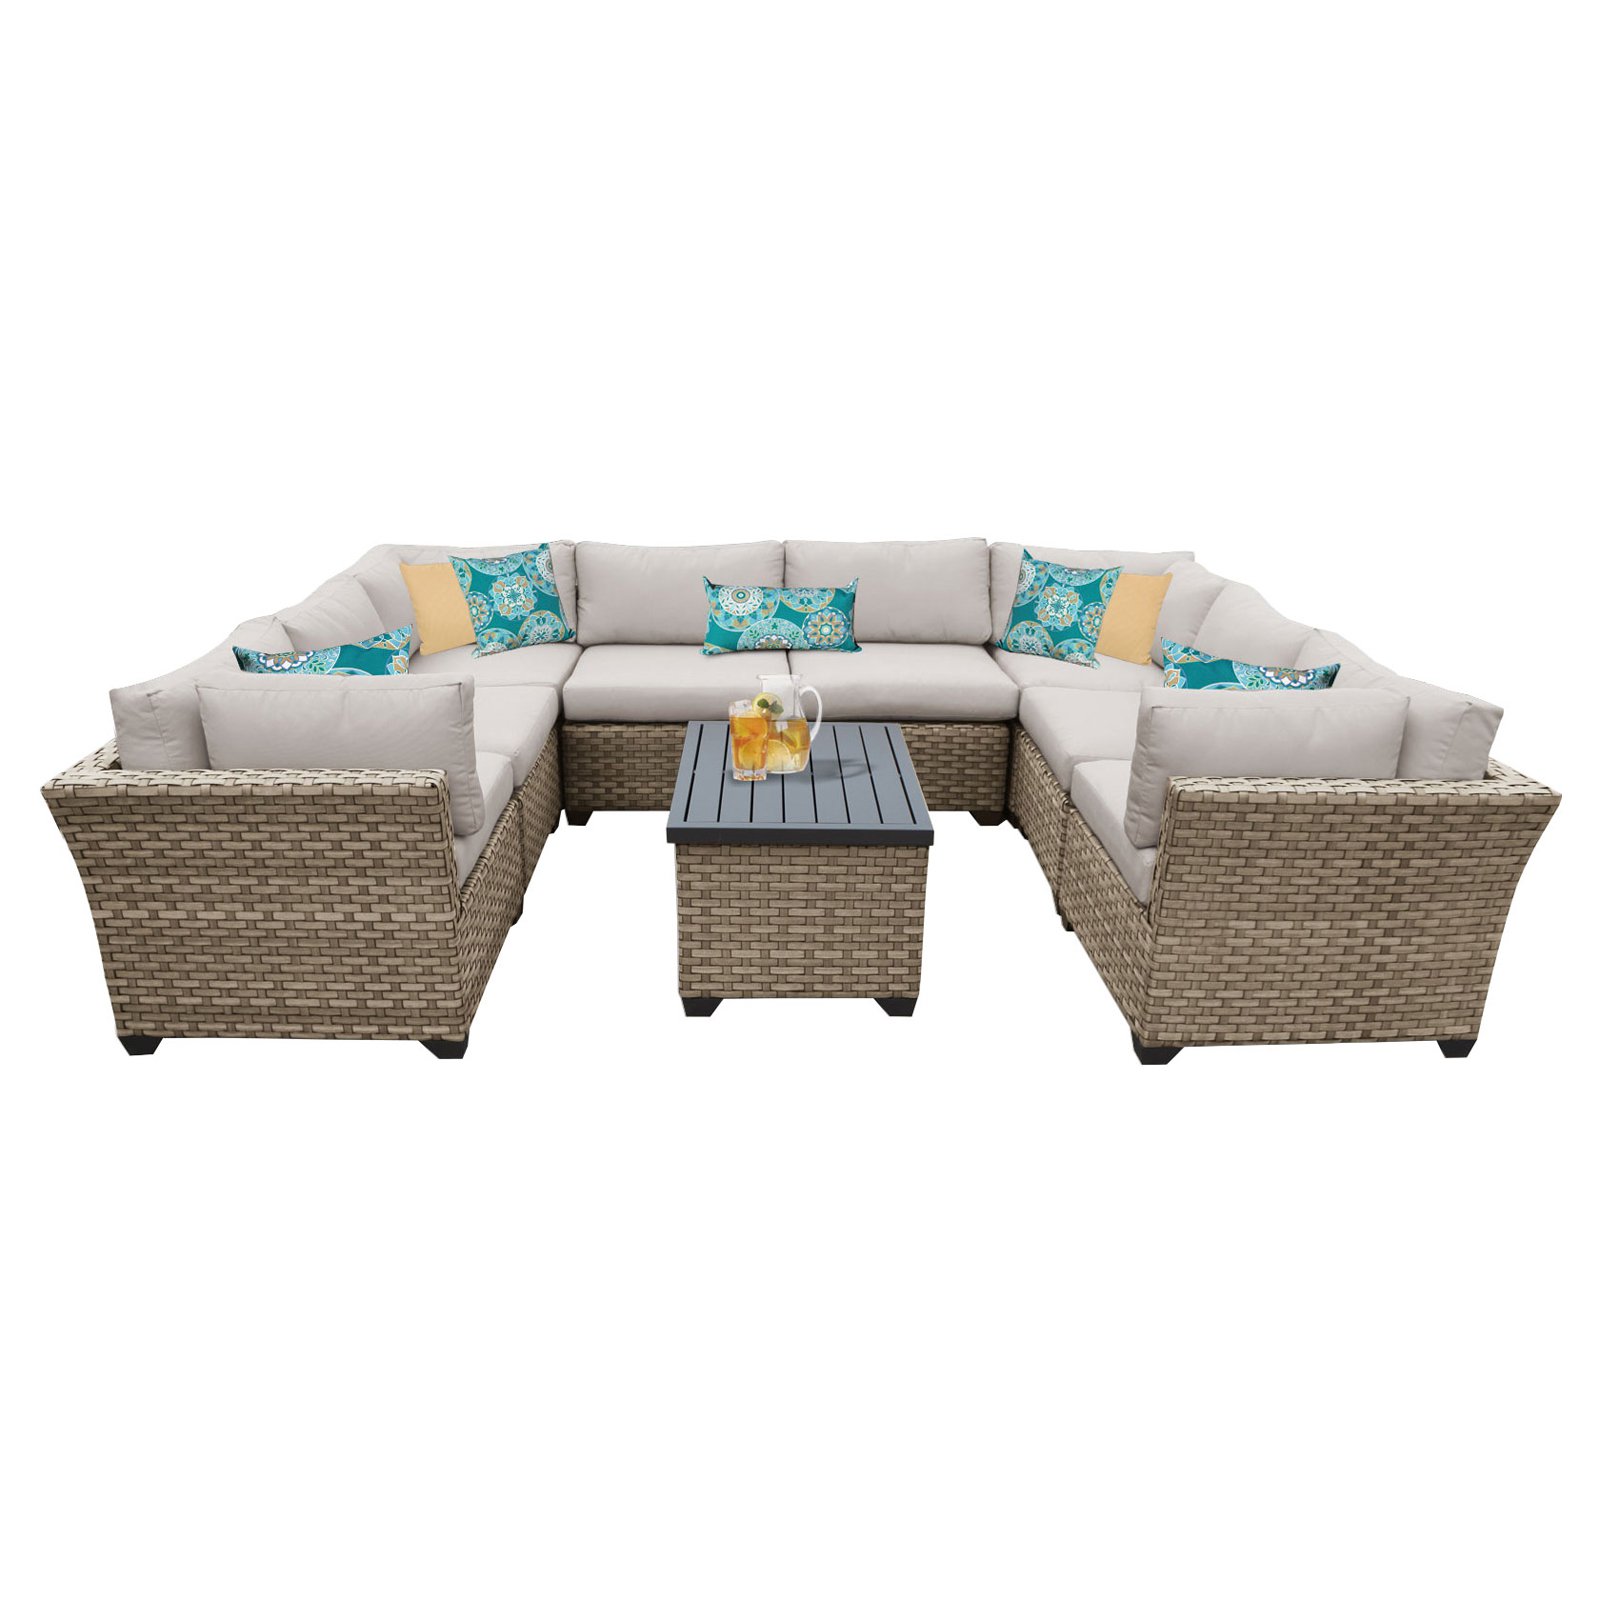 TK Classics Monterey Wicker 9 Piece Patio Conversation Set with Coffee Table and 2 Sets of Cushion Covers - image 2 of 5